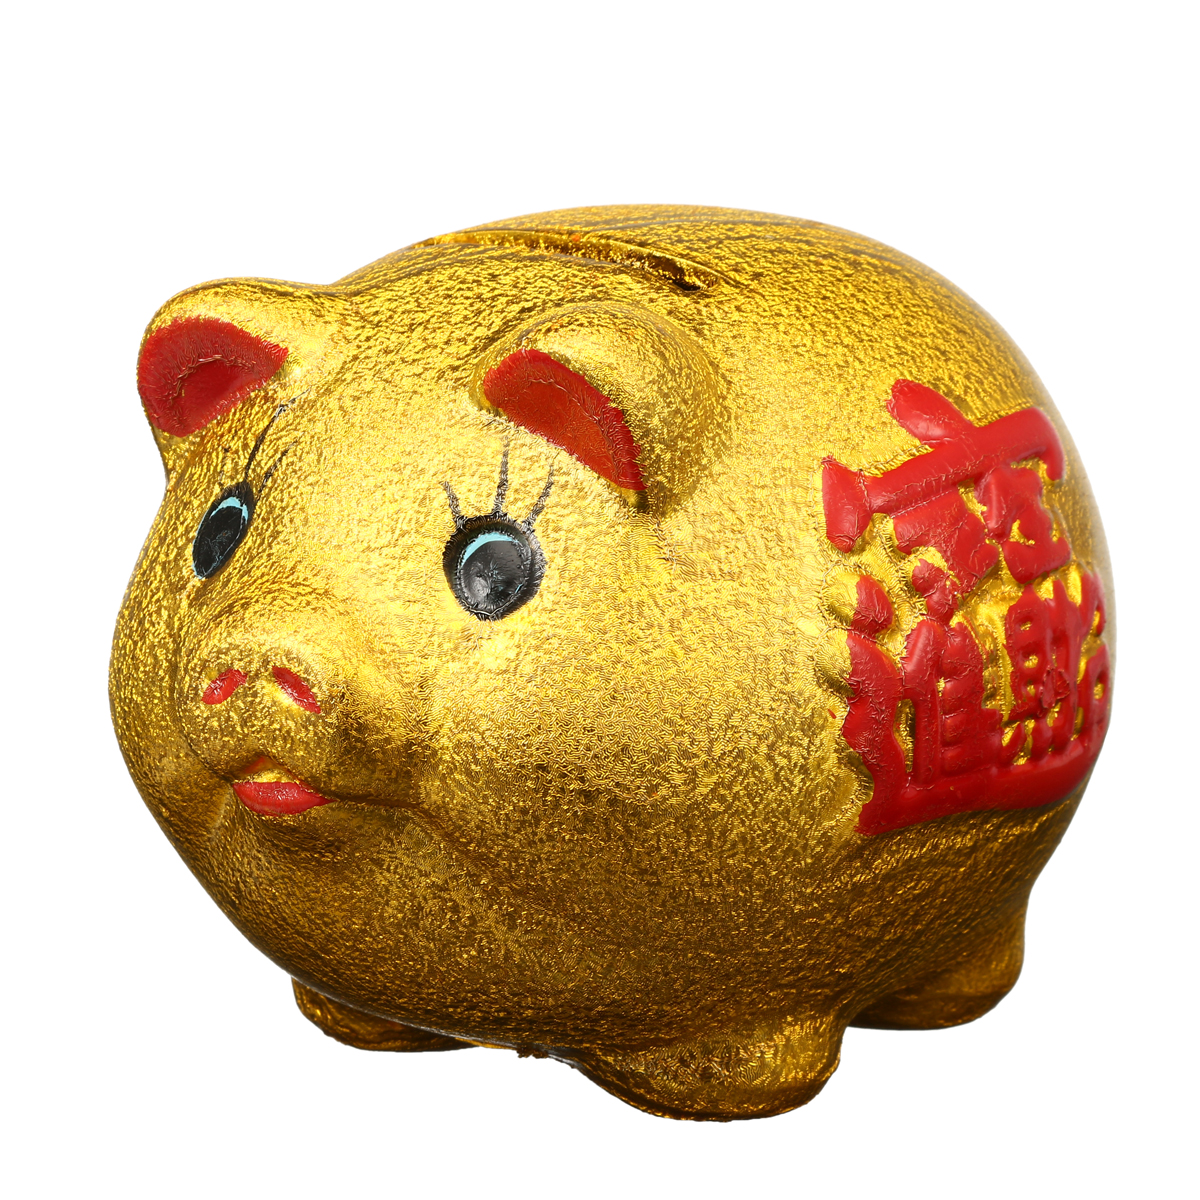 5-Gold-Ceramic-Piggy-Bank-Mini-Cute-Pig-Children-Coin-Collection-Gift-Decorations-1555224-1